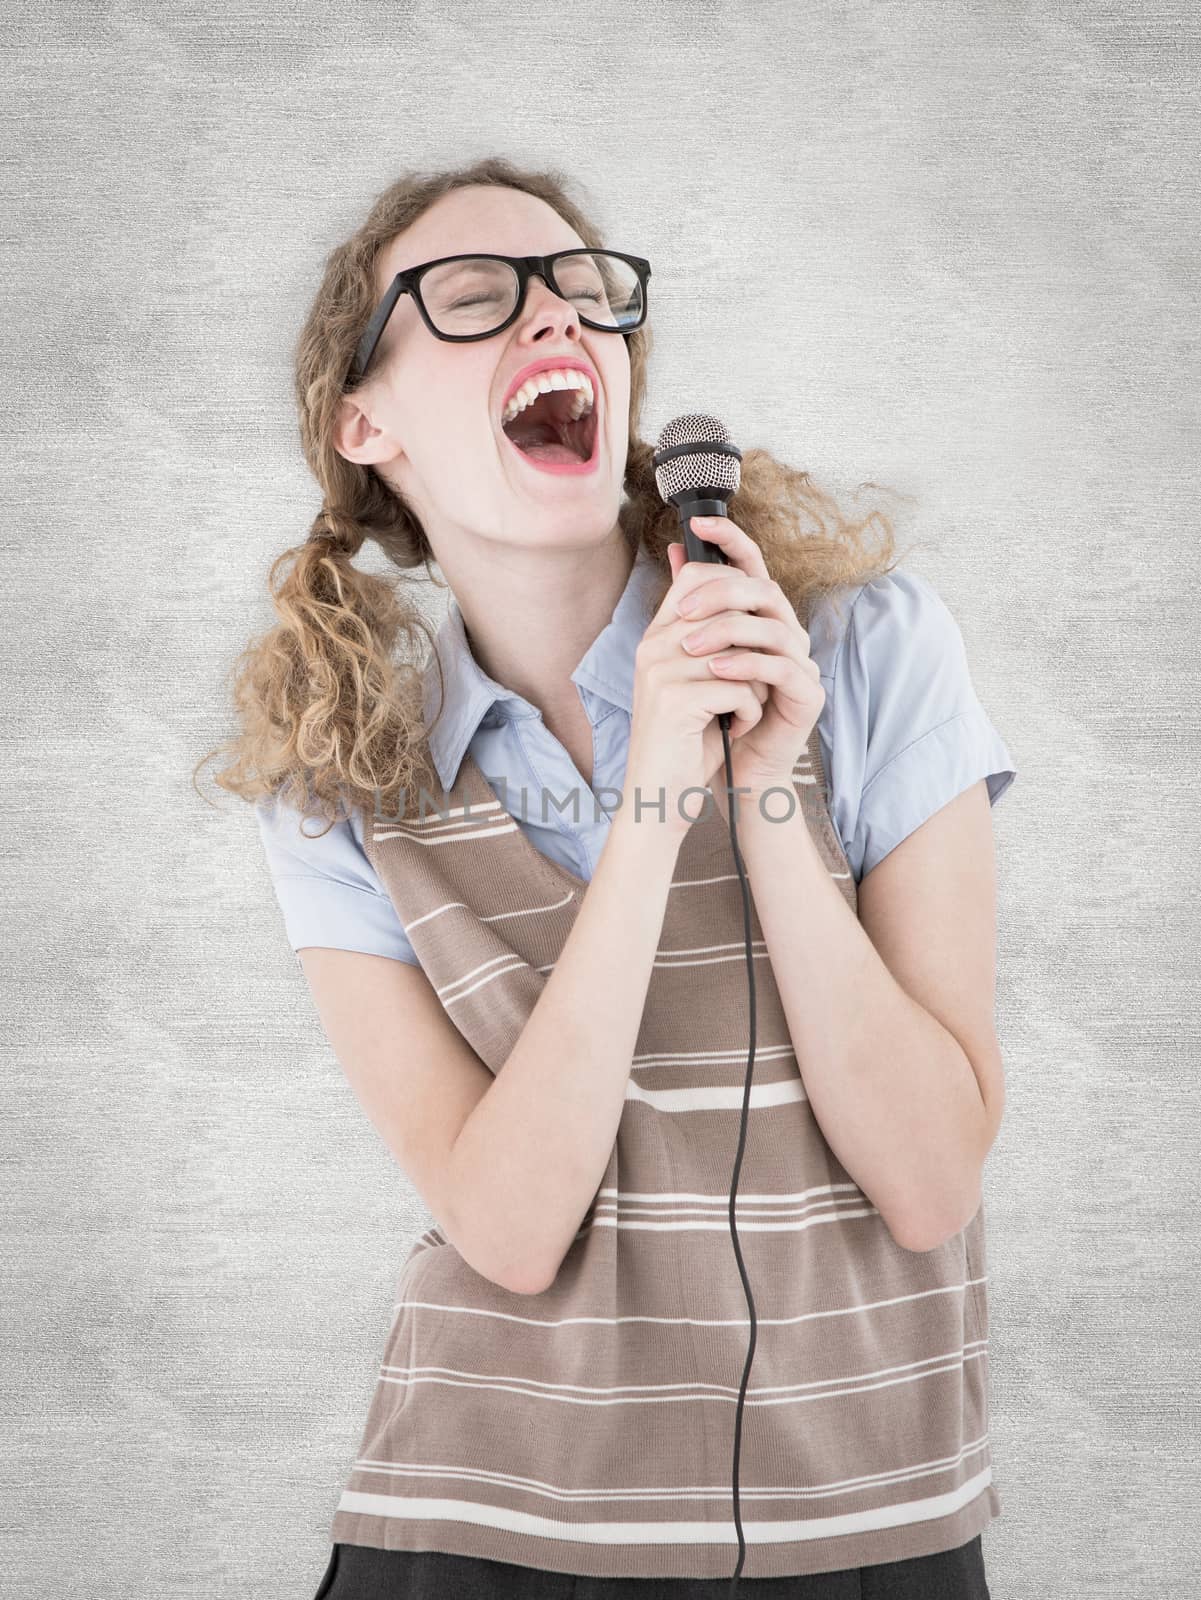 Geeky hipster woman singing into a microphone  against white background